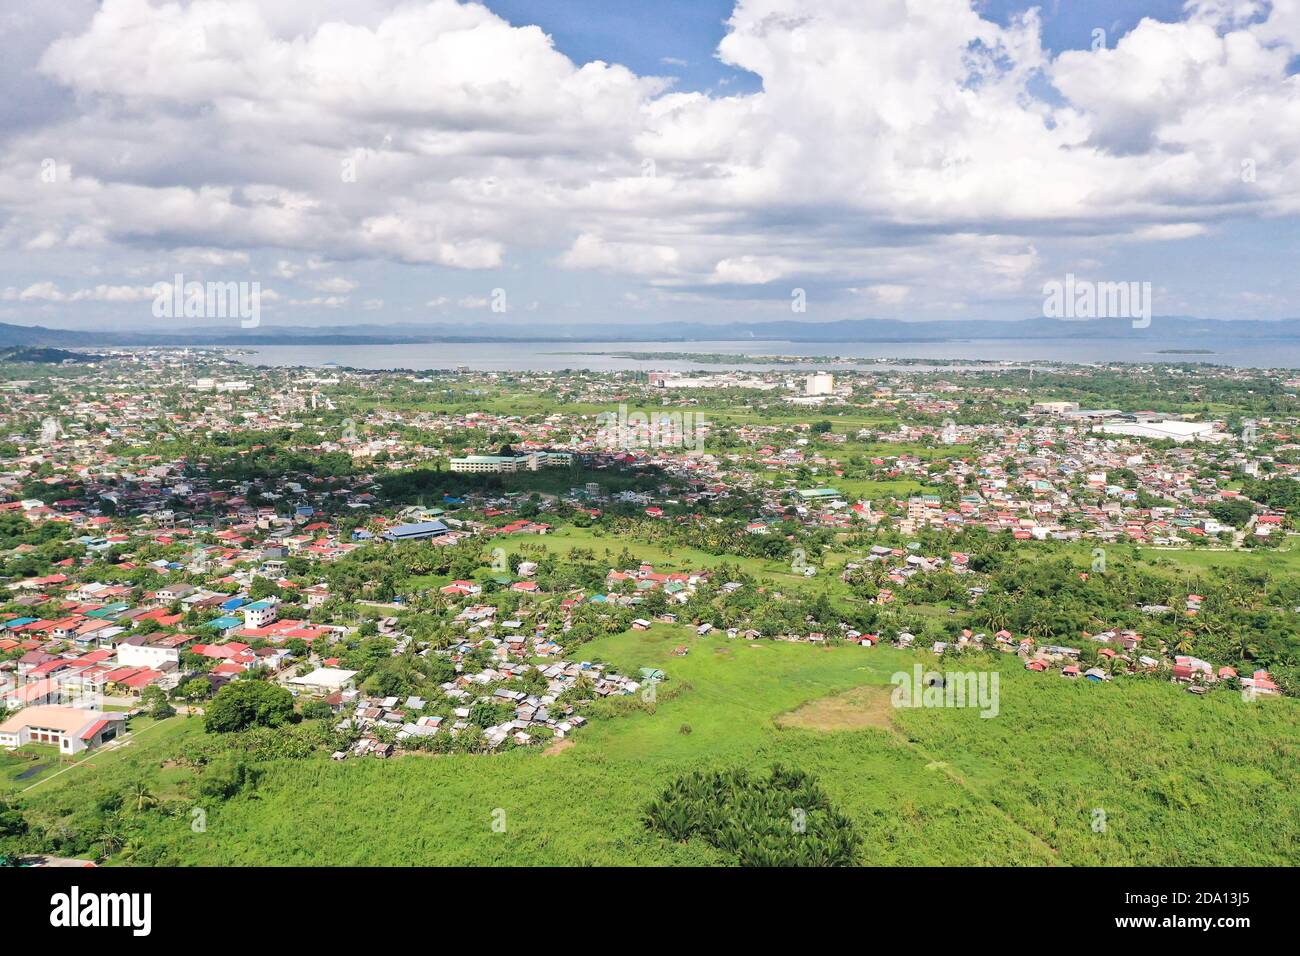 Tacloban, aerial view. Town and sky with cumulus clouds. Leyte Island, Philippines. Asian town by the sea. Summer and travel vacation concept. Stock Photo